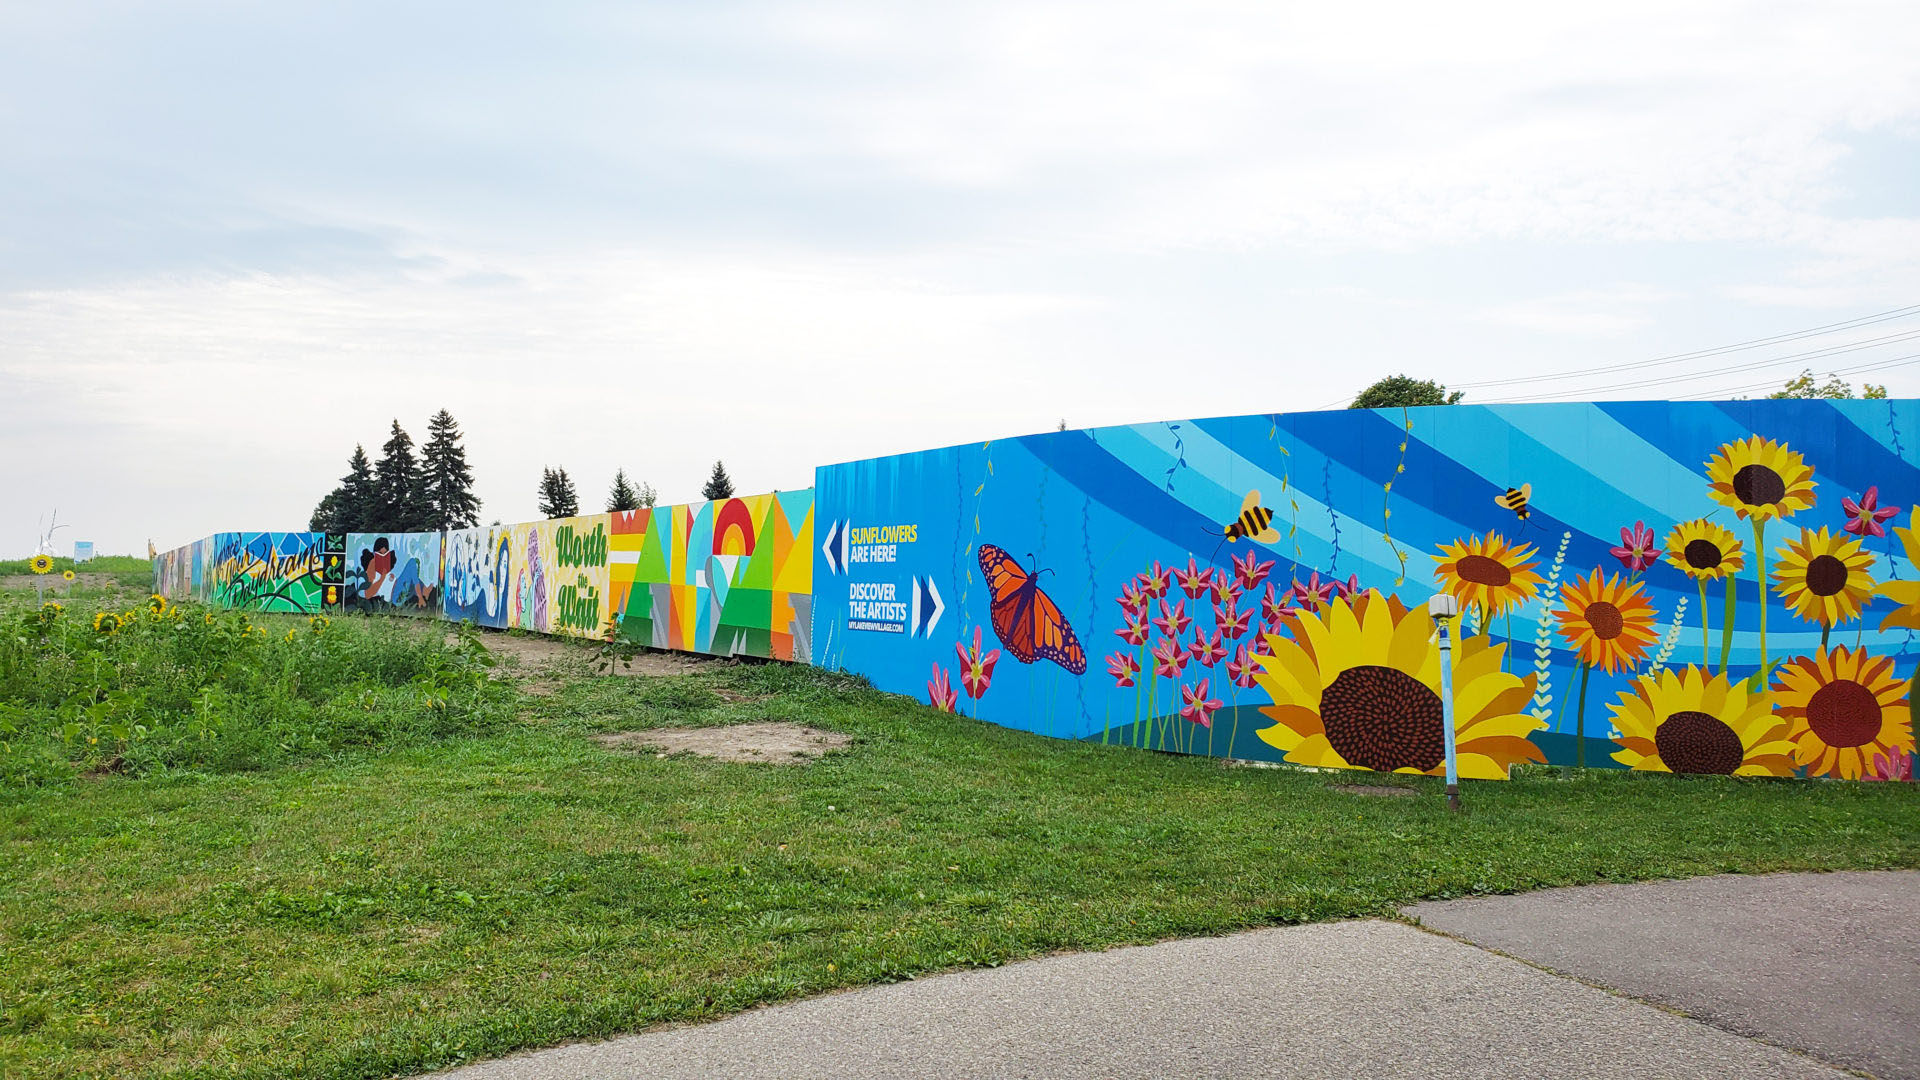 artist hoarding at lakeview village